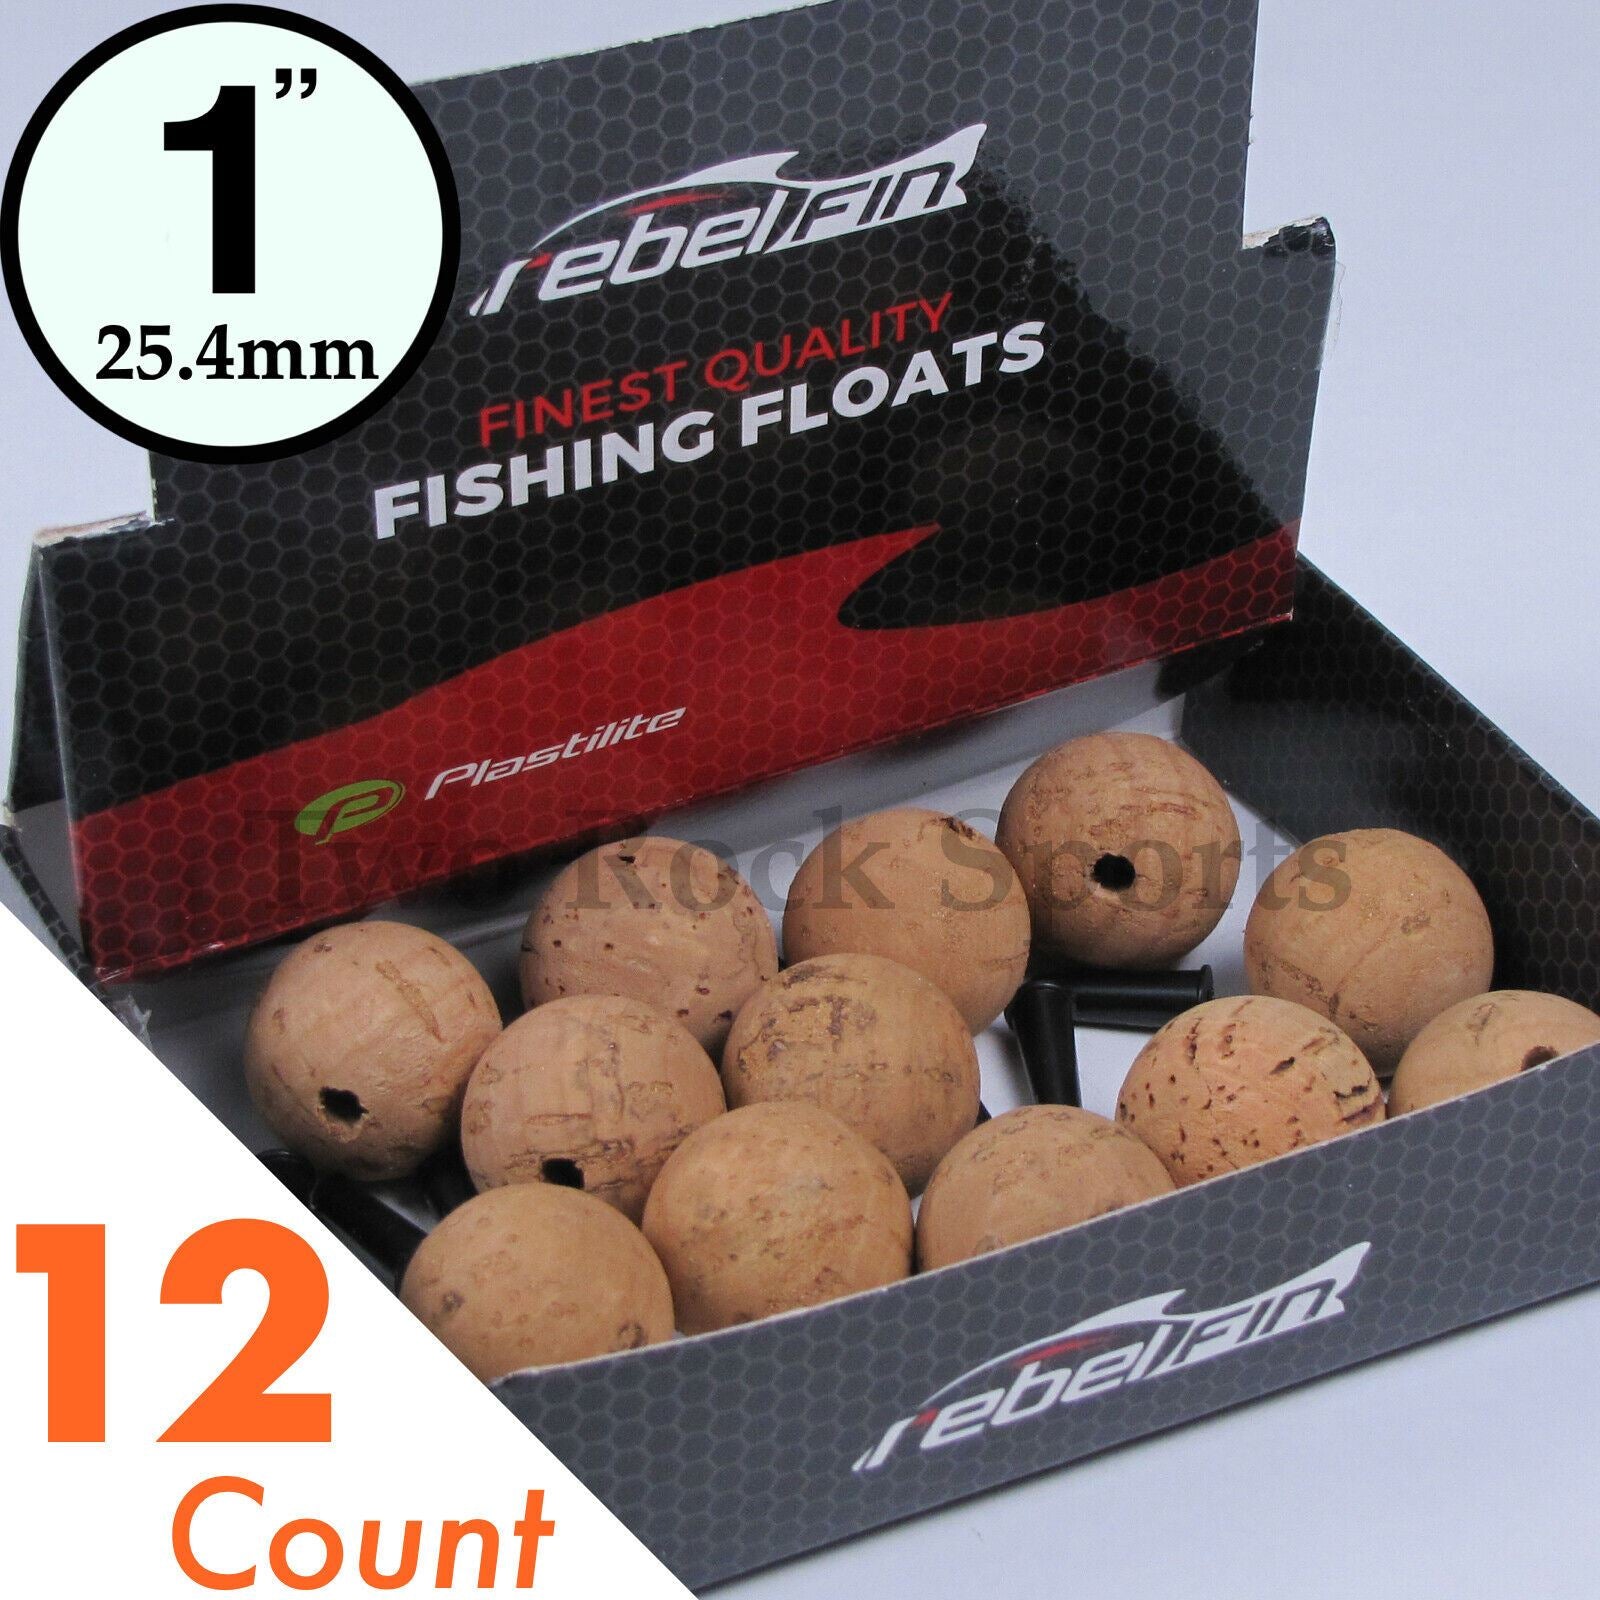 3 to 250 Count - 1-3/4 1.75 inch - ROUND NATURAL CORK Fishing Bobber  Floats 